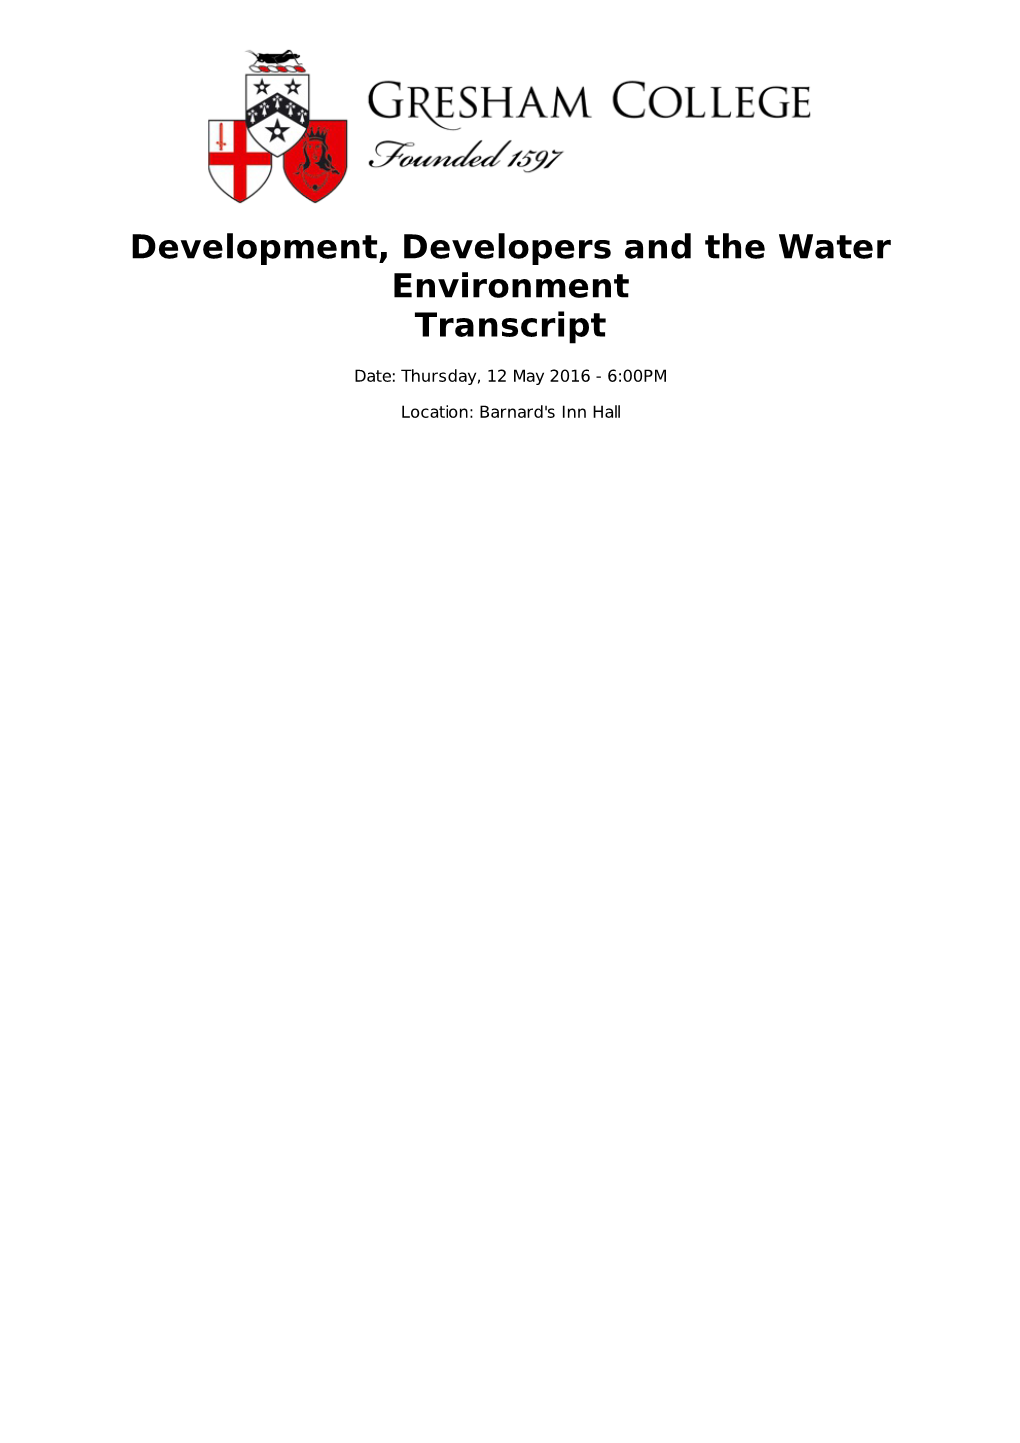 Development, Developers and the Water Environment Transcript